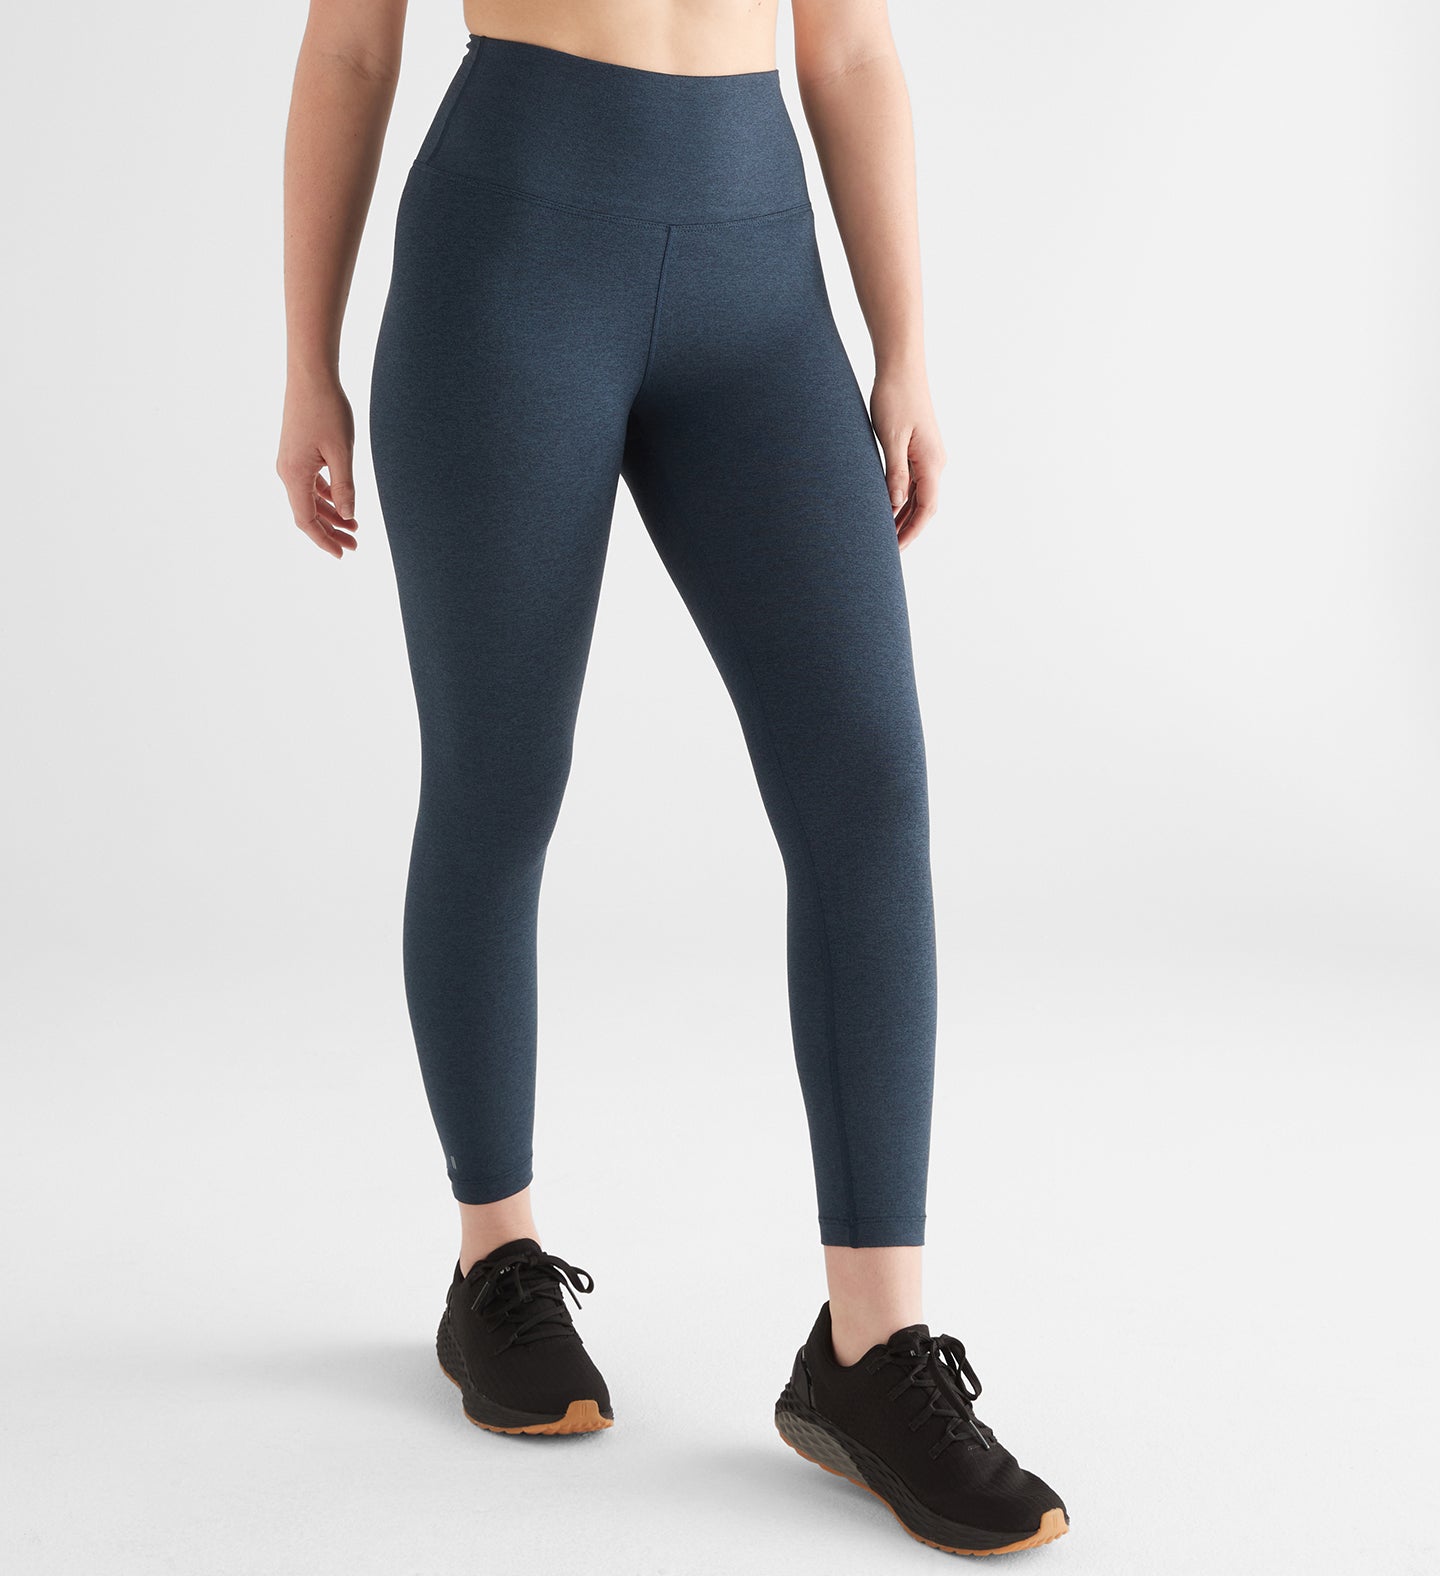 Balance Collection Yoga Pants Black Size XL - $25 - From Heather